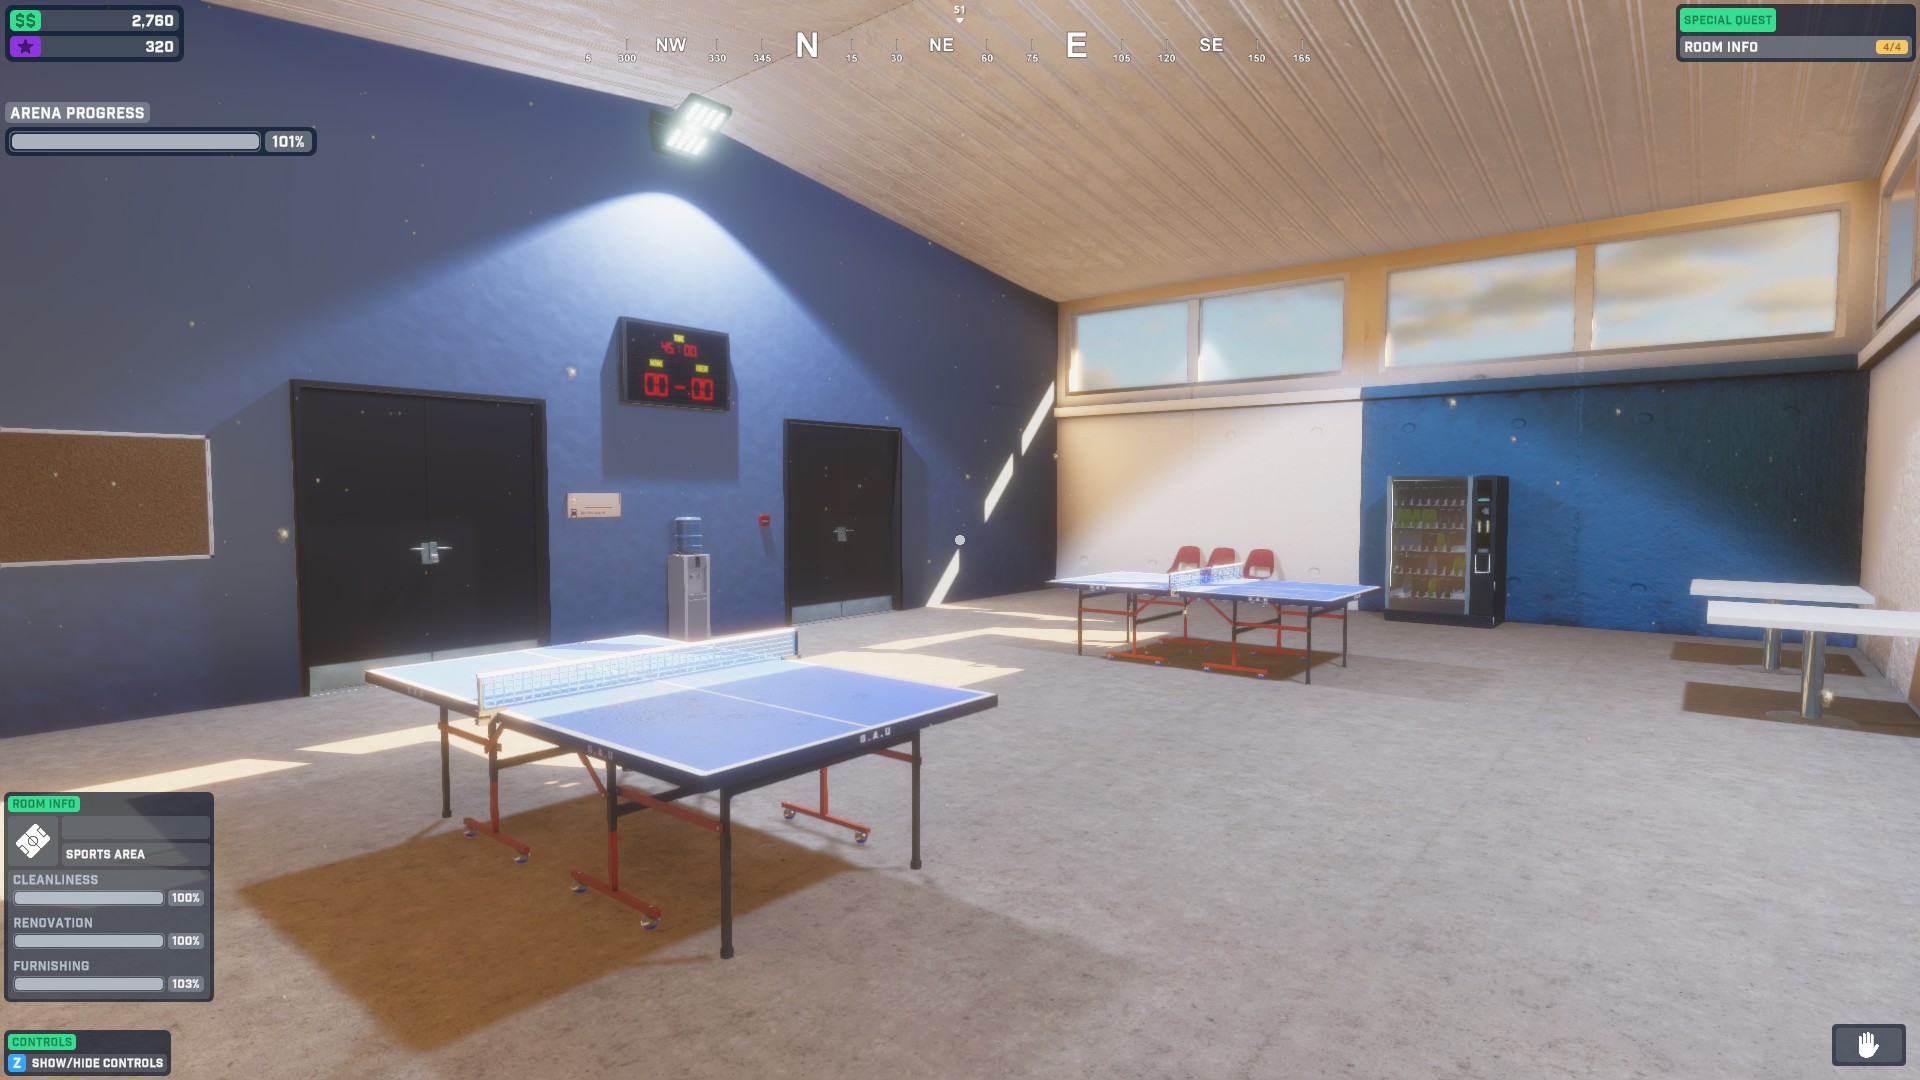 Clear view of a fully renovated room with blue and white walls, two ping pong tables can be seen in the centre.